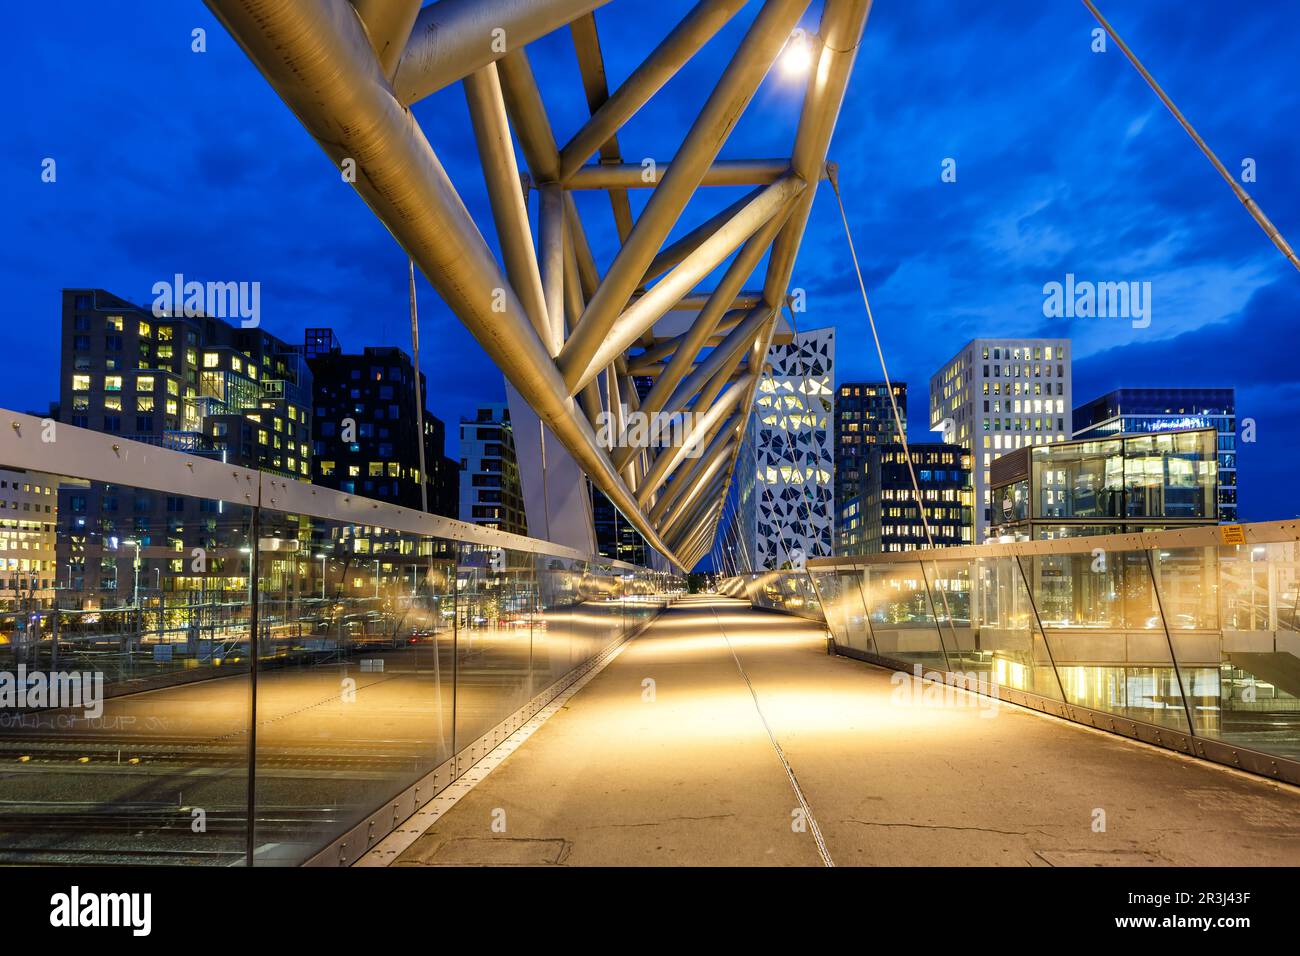 Oslo skyline modern city architecture building with bridge in barcode district at night in Norway Stock Photo